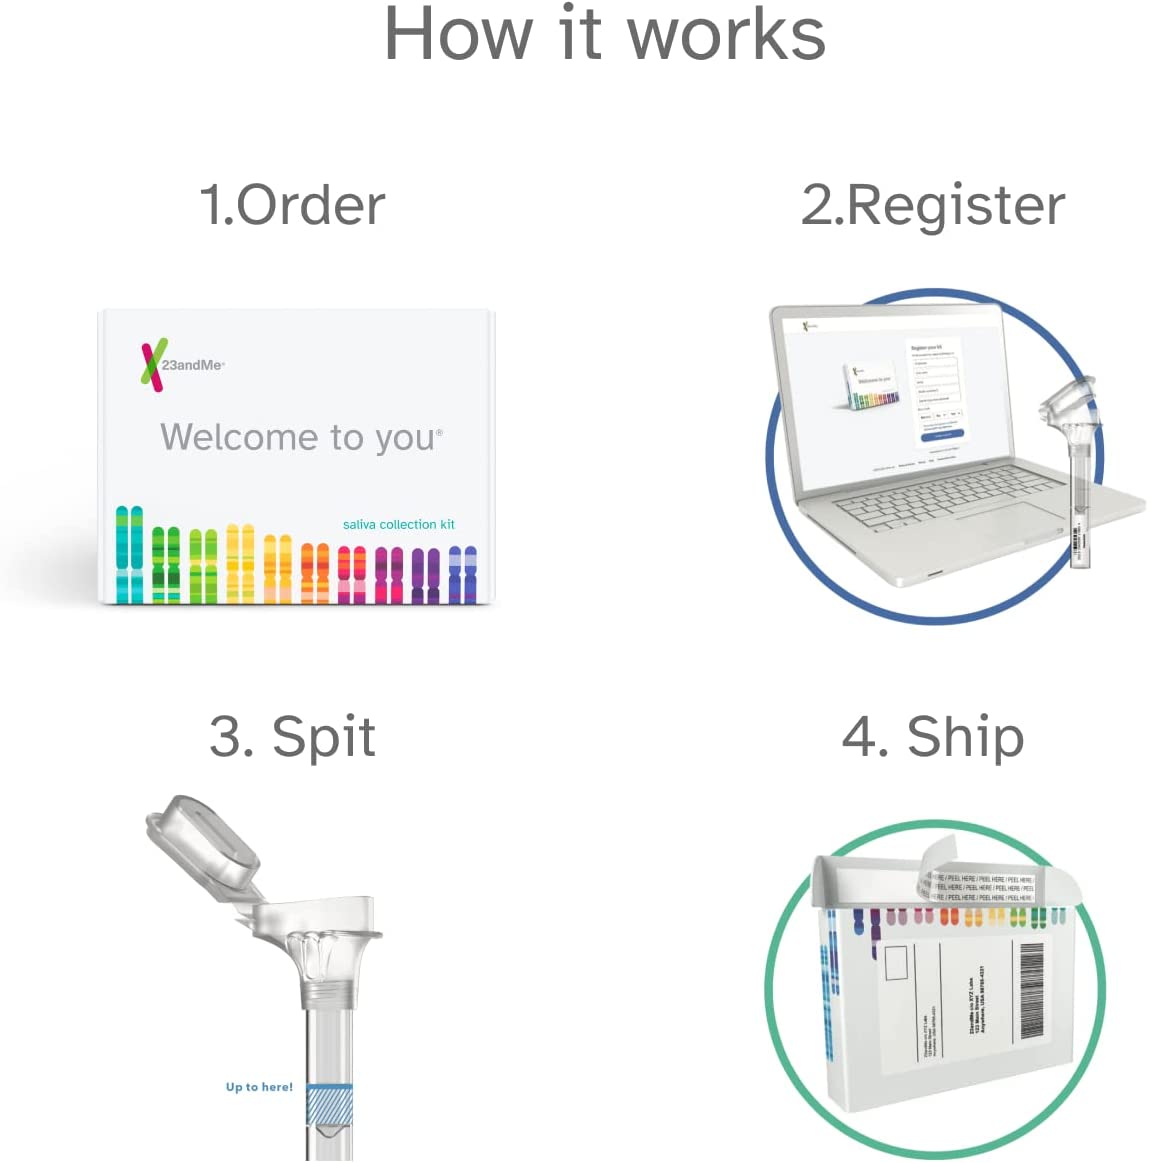 IMPORTANT! 23andMe is one of the only personal DNA test kit vendors offering a “health service” with FDA approve reports. PLUS 23andMe does NOT ALLOW UPLOADING of DNA test data from other DNA sites like Ancestry … so this is the only way to connect with other 23andMe users.